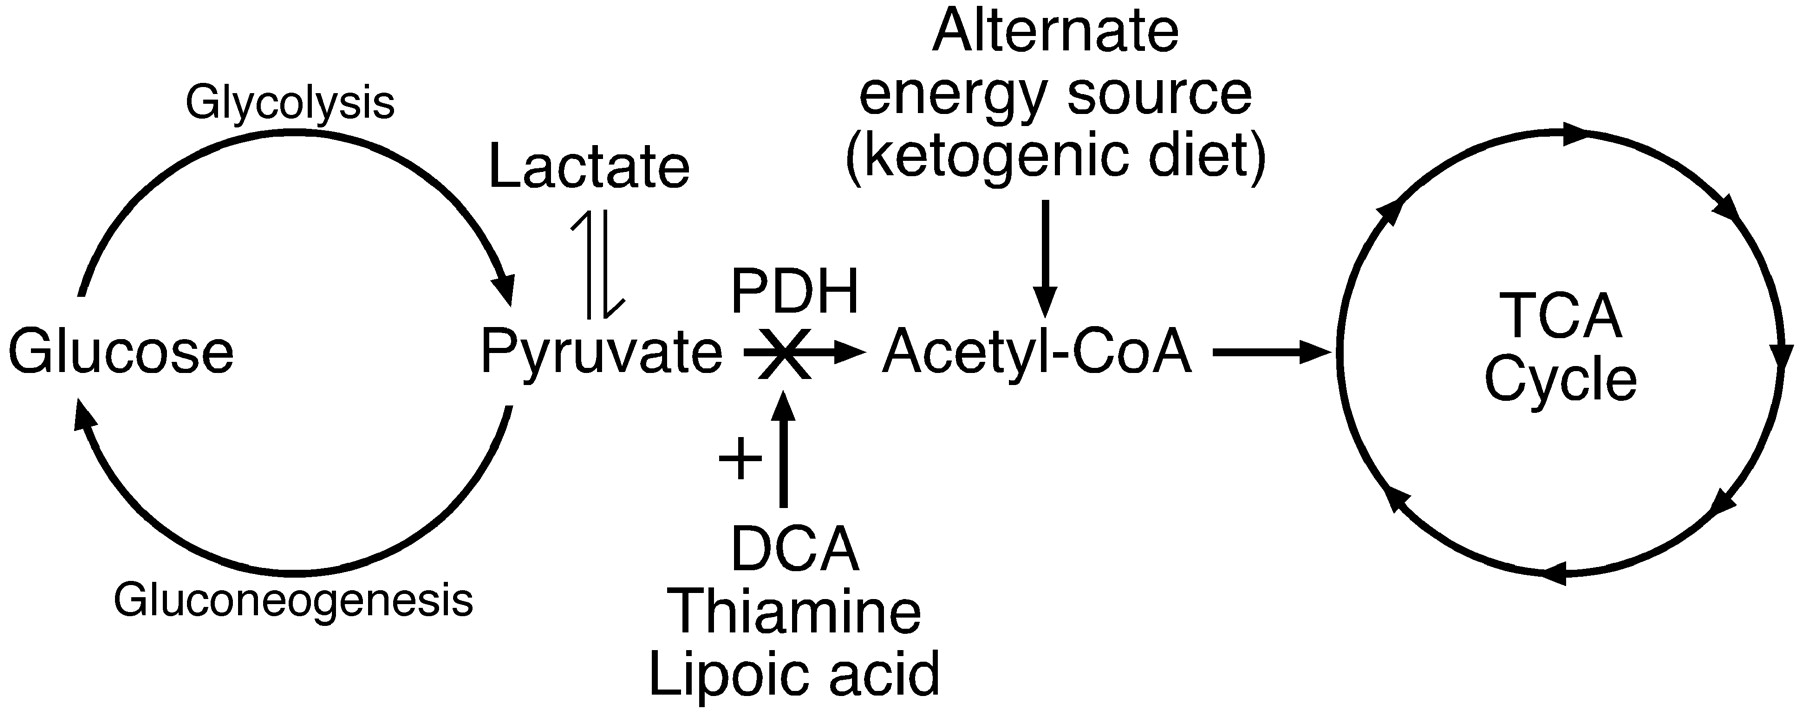 Pyruvate dehydrogenase requires thiamine for activation, and itself is required for glucose metabolism. Without its activity pyruvate is used for lactic acid fermentation (source)